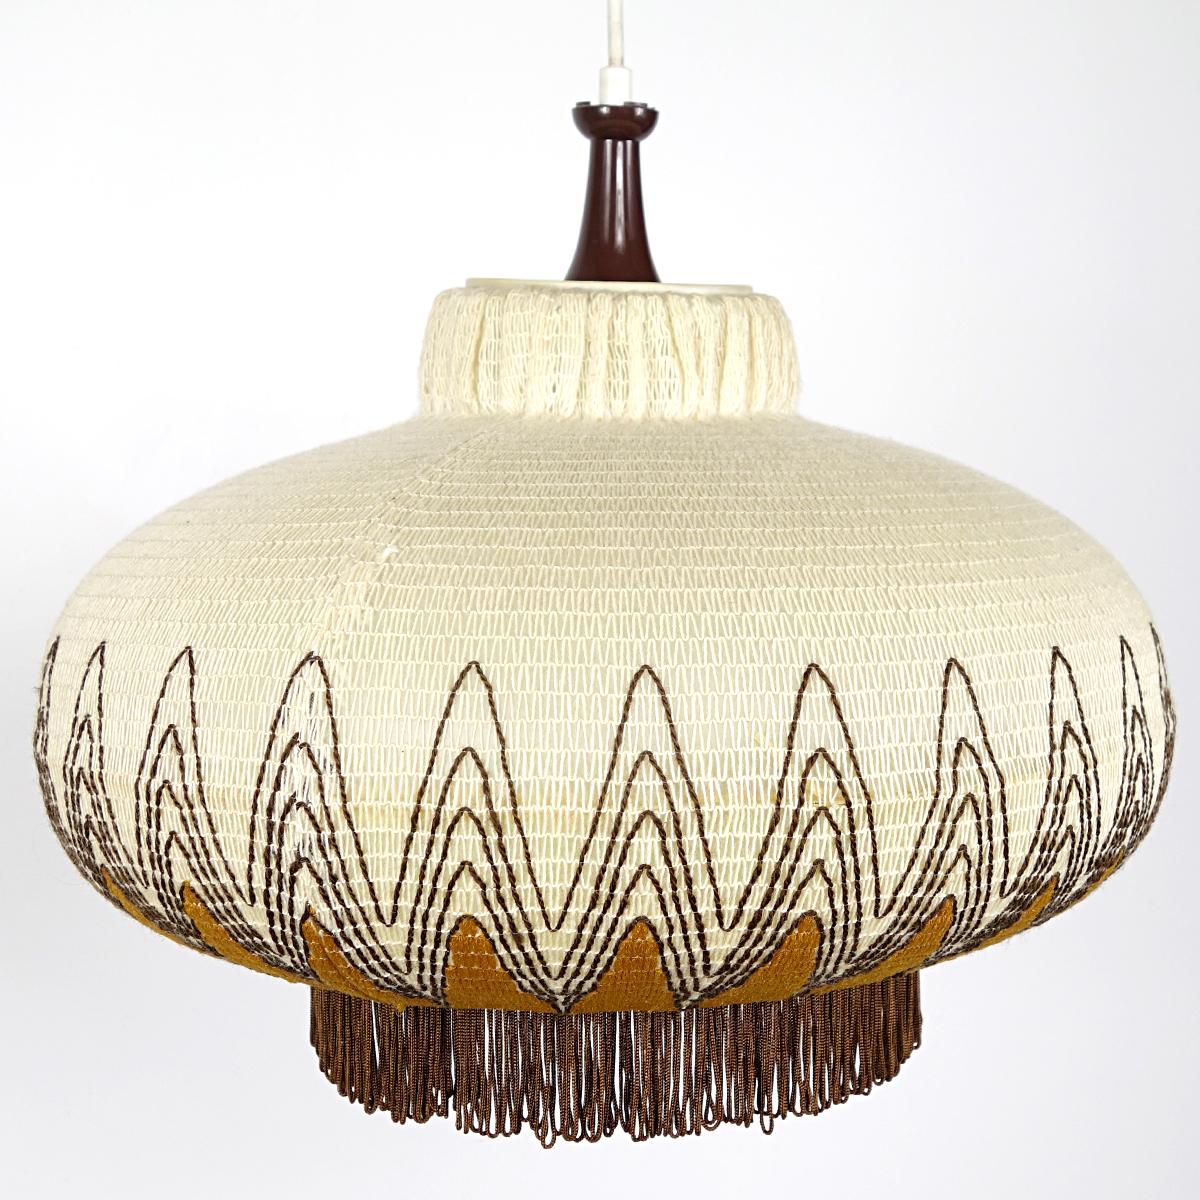 This attractive and radiant pendant has a shade made of plastic that is covered with a crocheted pattern with embroidered accents.
The warm light that is obtained this way creates a great ambiance.